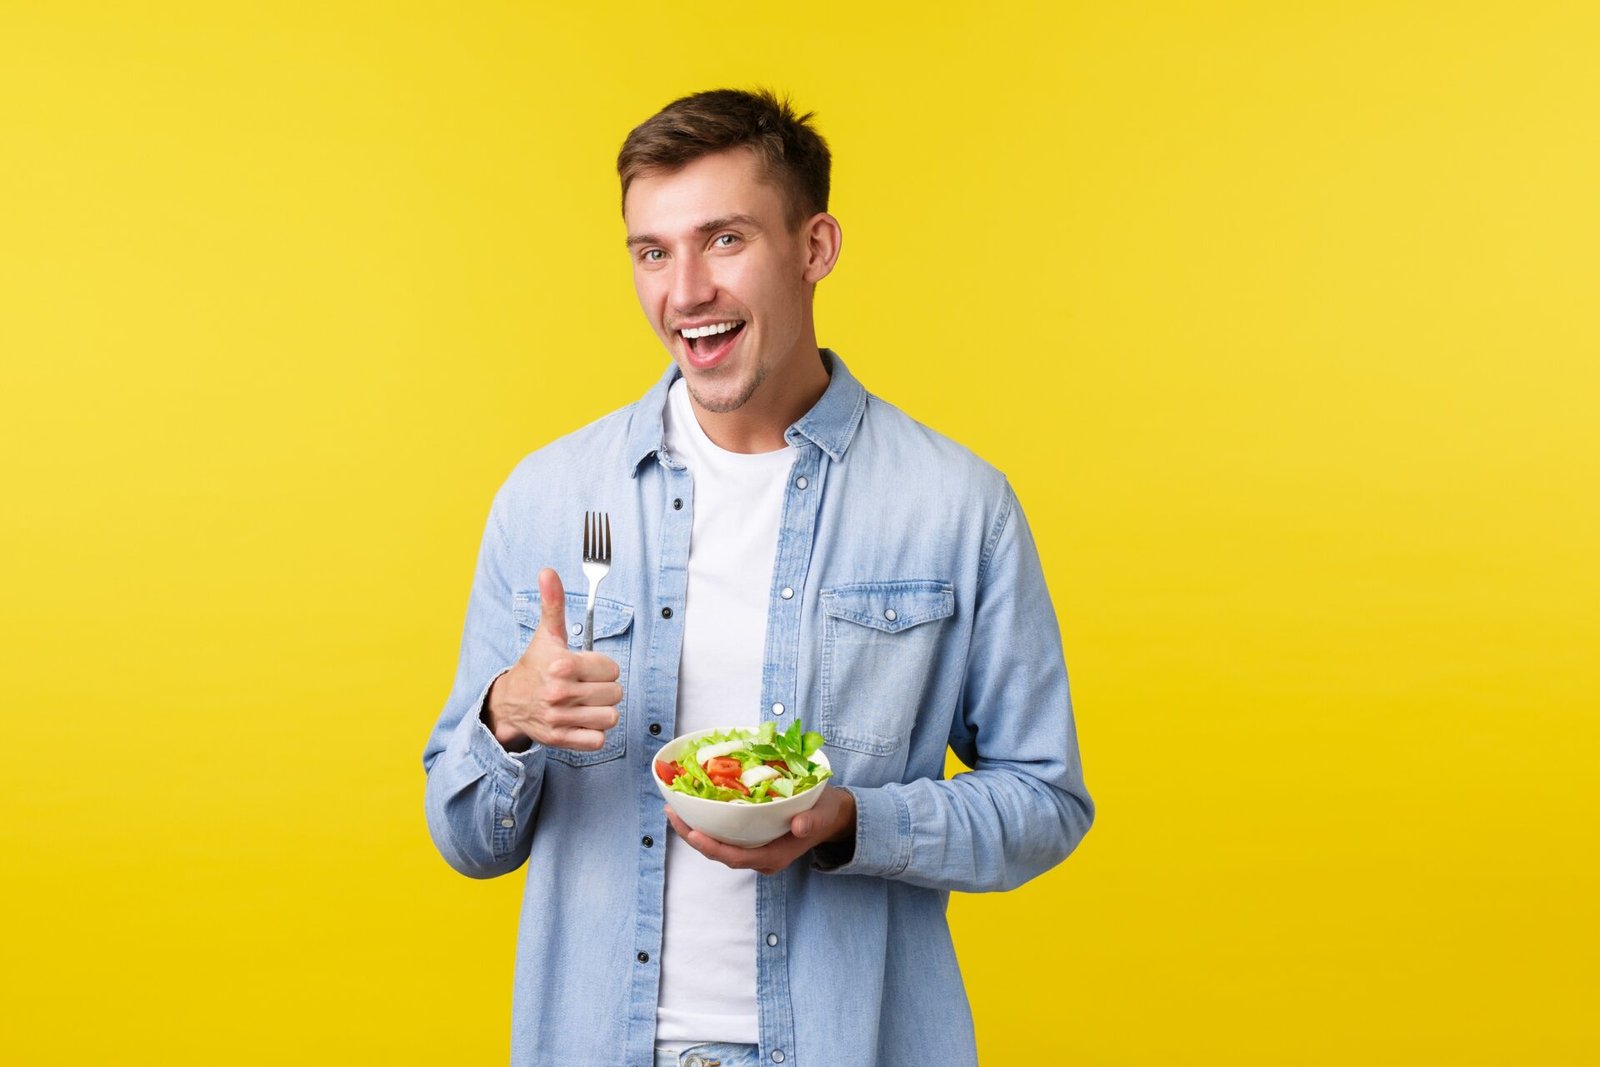 happy-smiling-man-showing-thumbs-up-satisfied-with-delicious-breakfast-eating-salad-being-on-diet-trying-stay-fit-standing-yellow-background